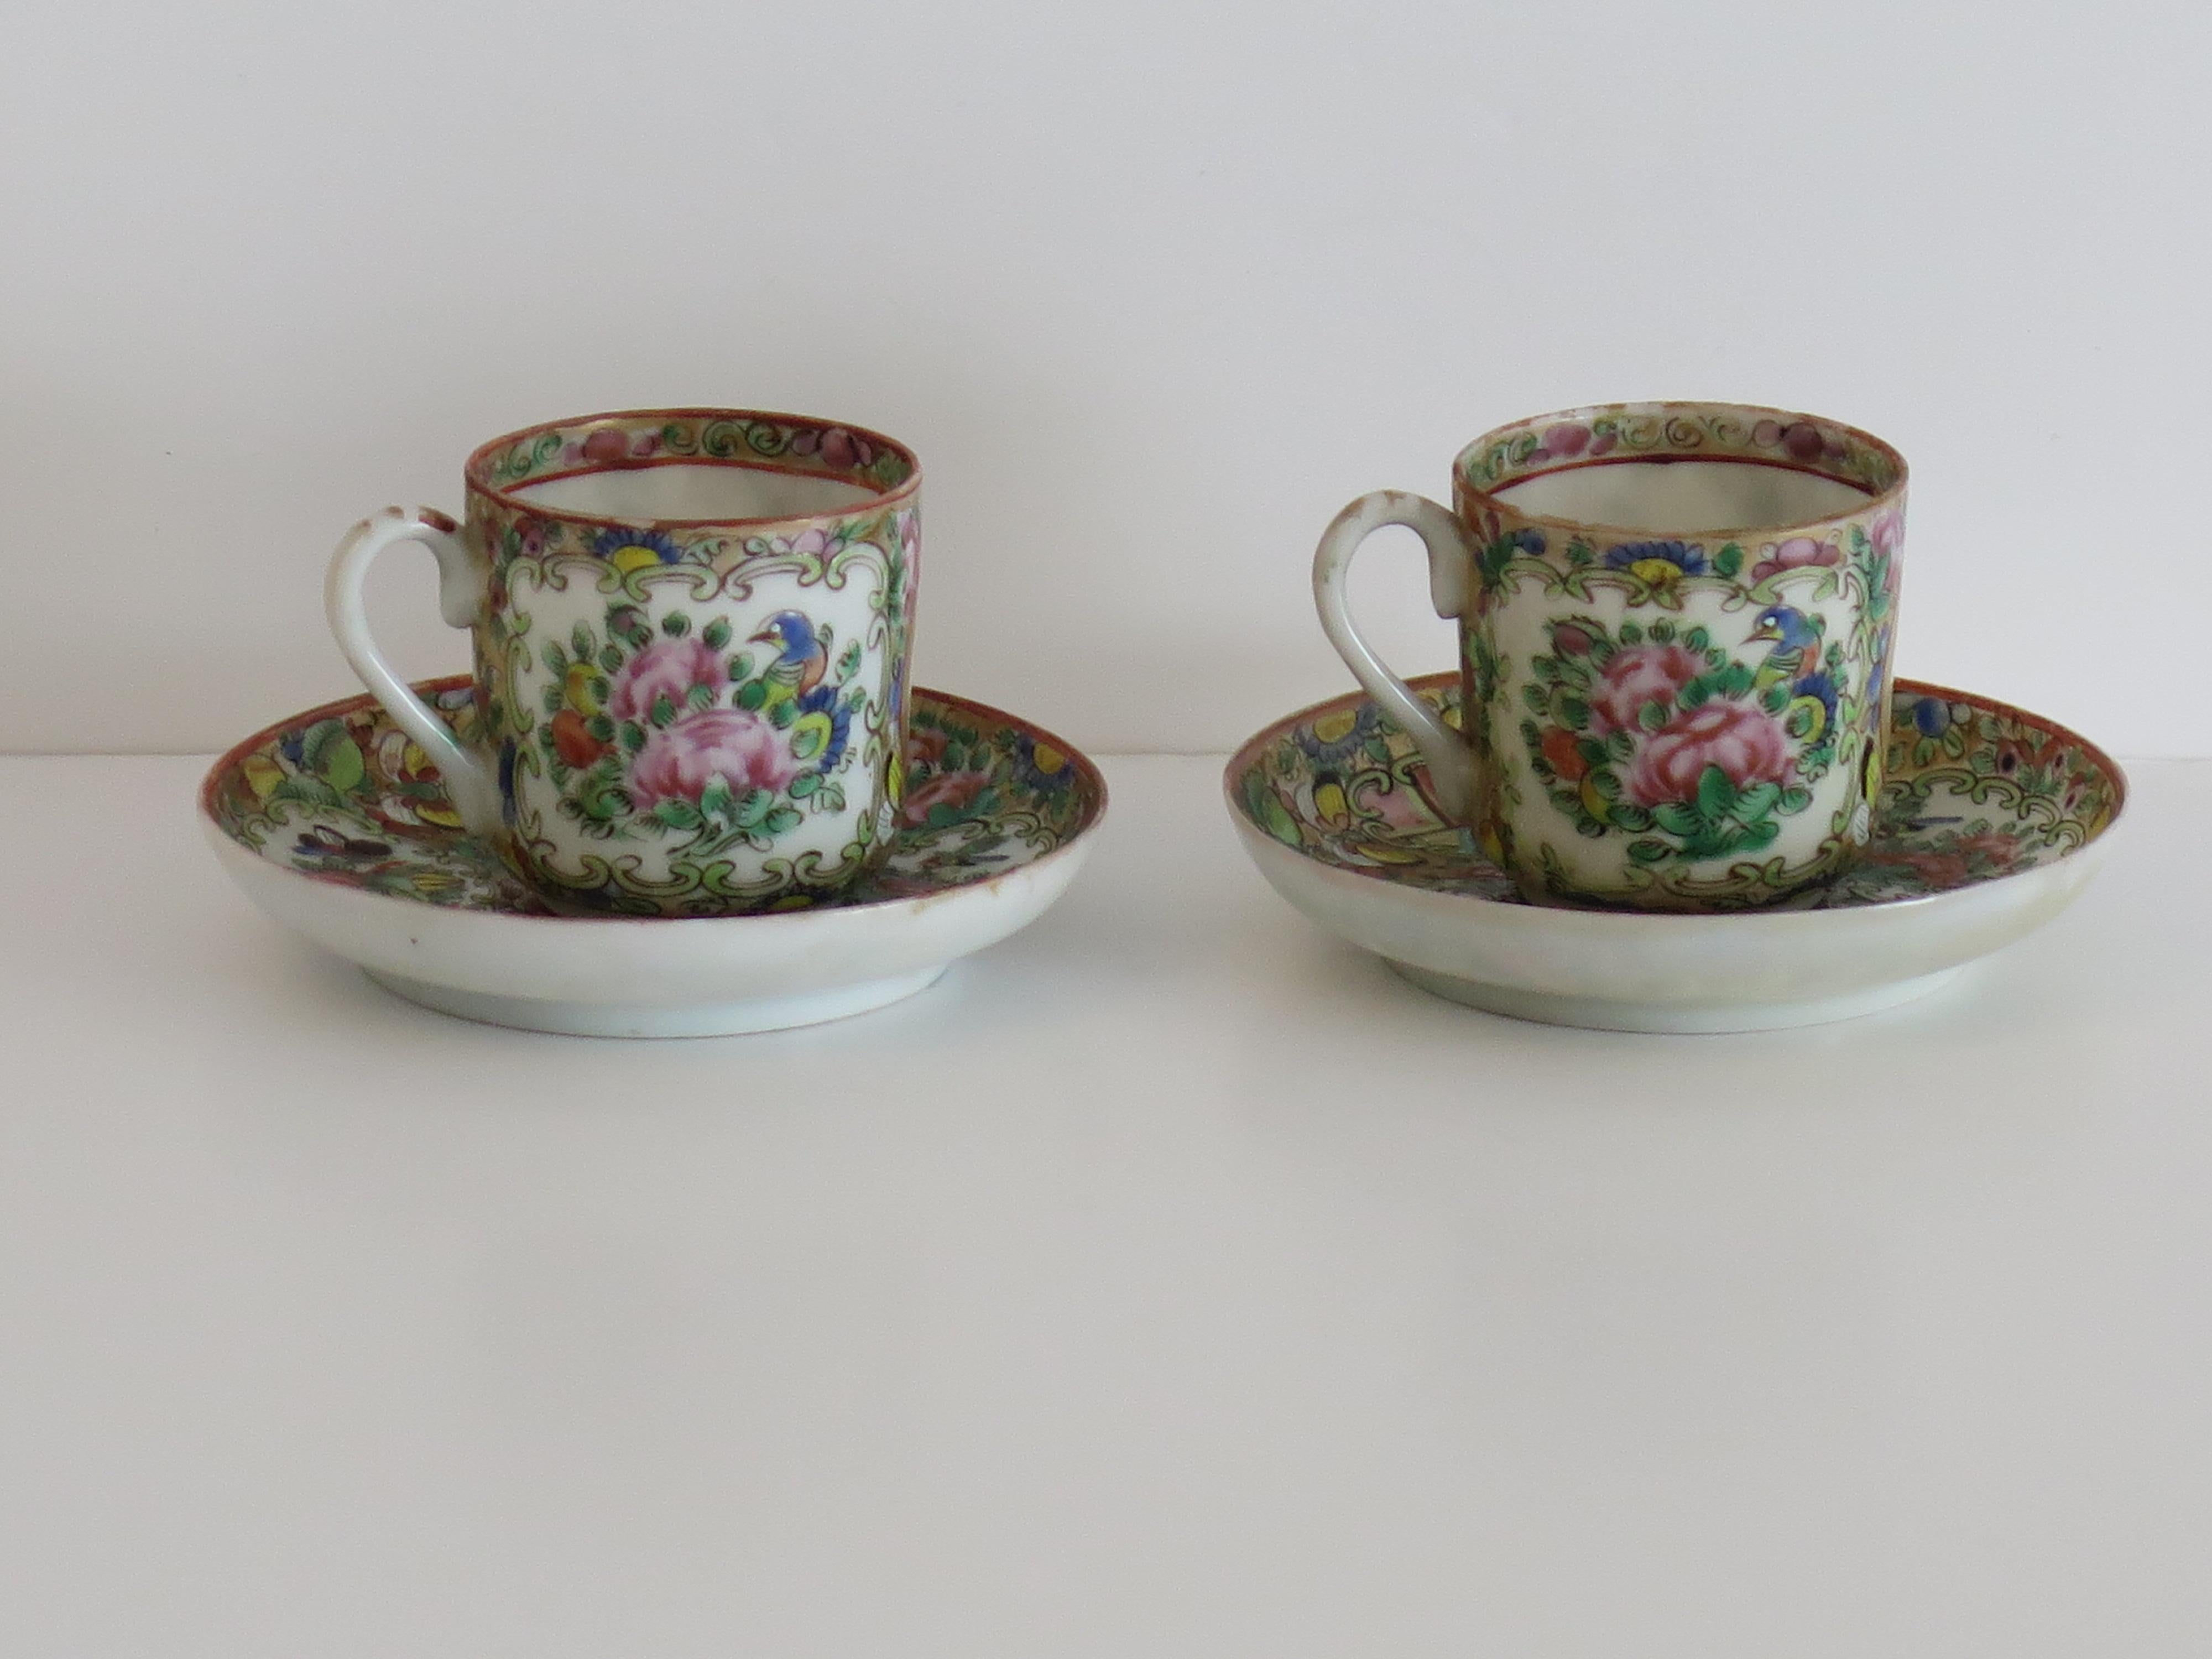 This is a very decorative PAIR of Chinese export Cups and Saucers made from eggshell porcelain and hand painted in Rose Medallion pattern, which we date to the 19th century, Qing dynasty, circa 1850.

All pieces are very finely hand potted in a very